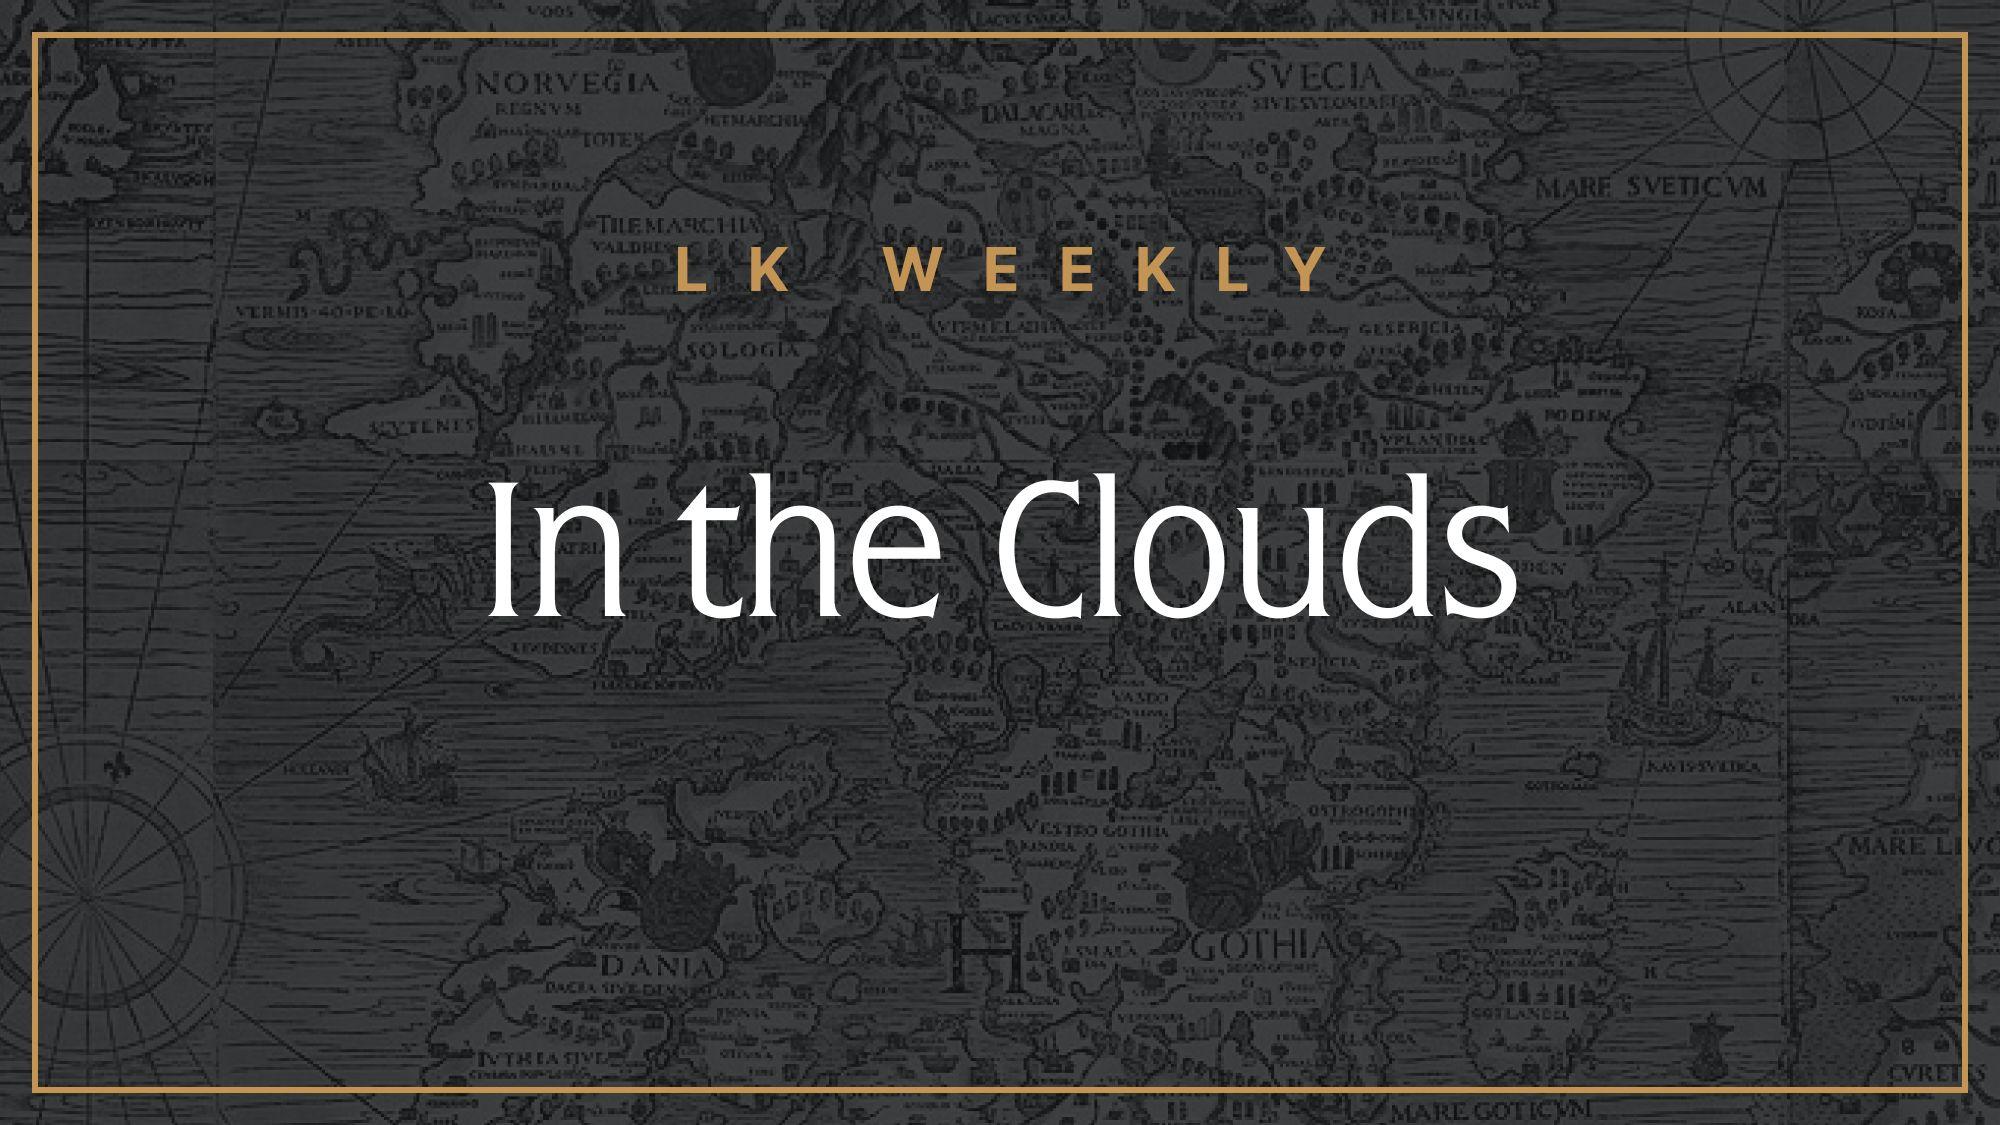 "LK Weekly: In the Clouds"